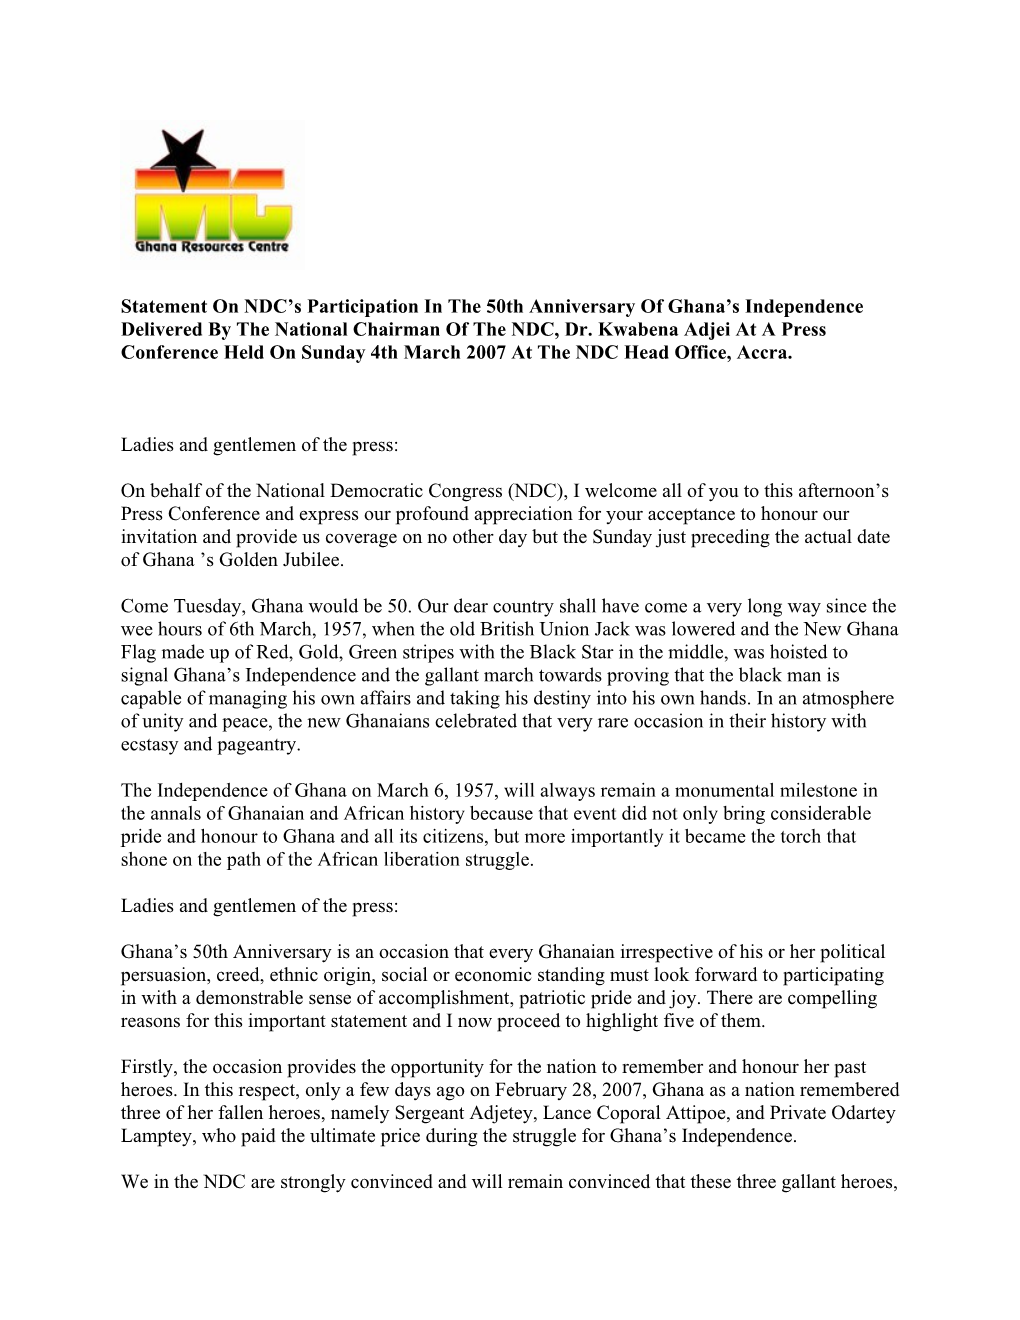 Statement on NDC S Participation in the 50Th Anniversary of Ghana S Independence Delivered